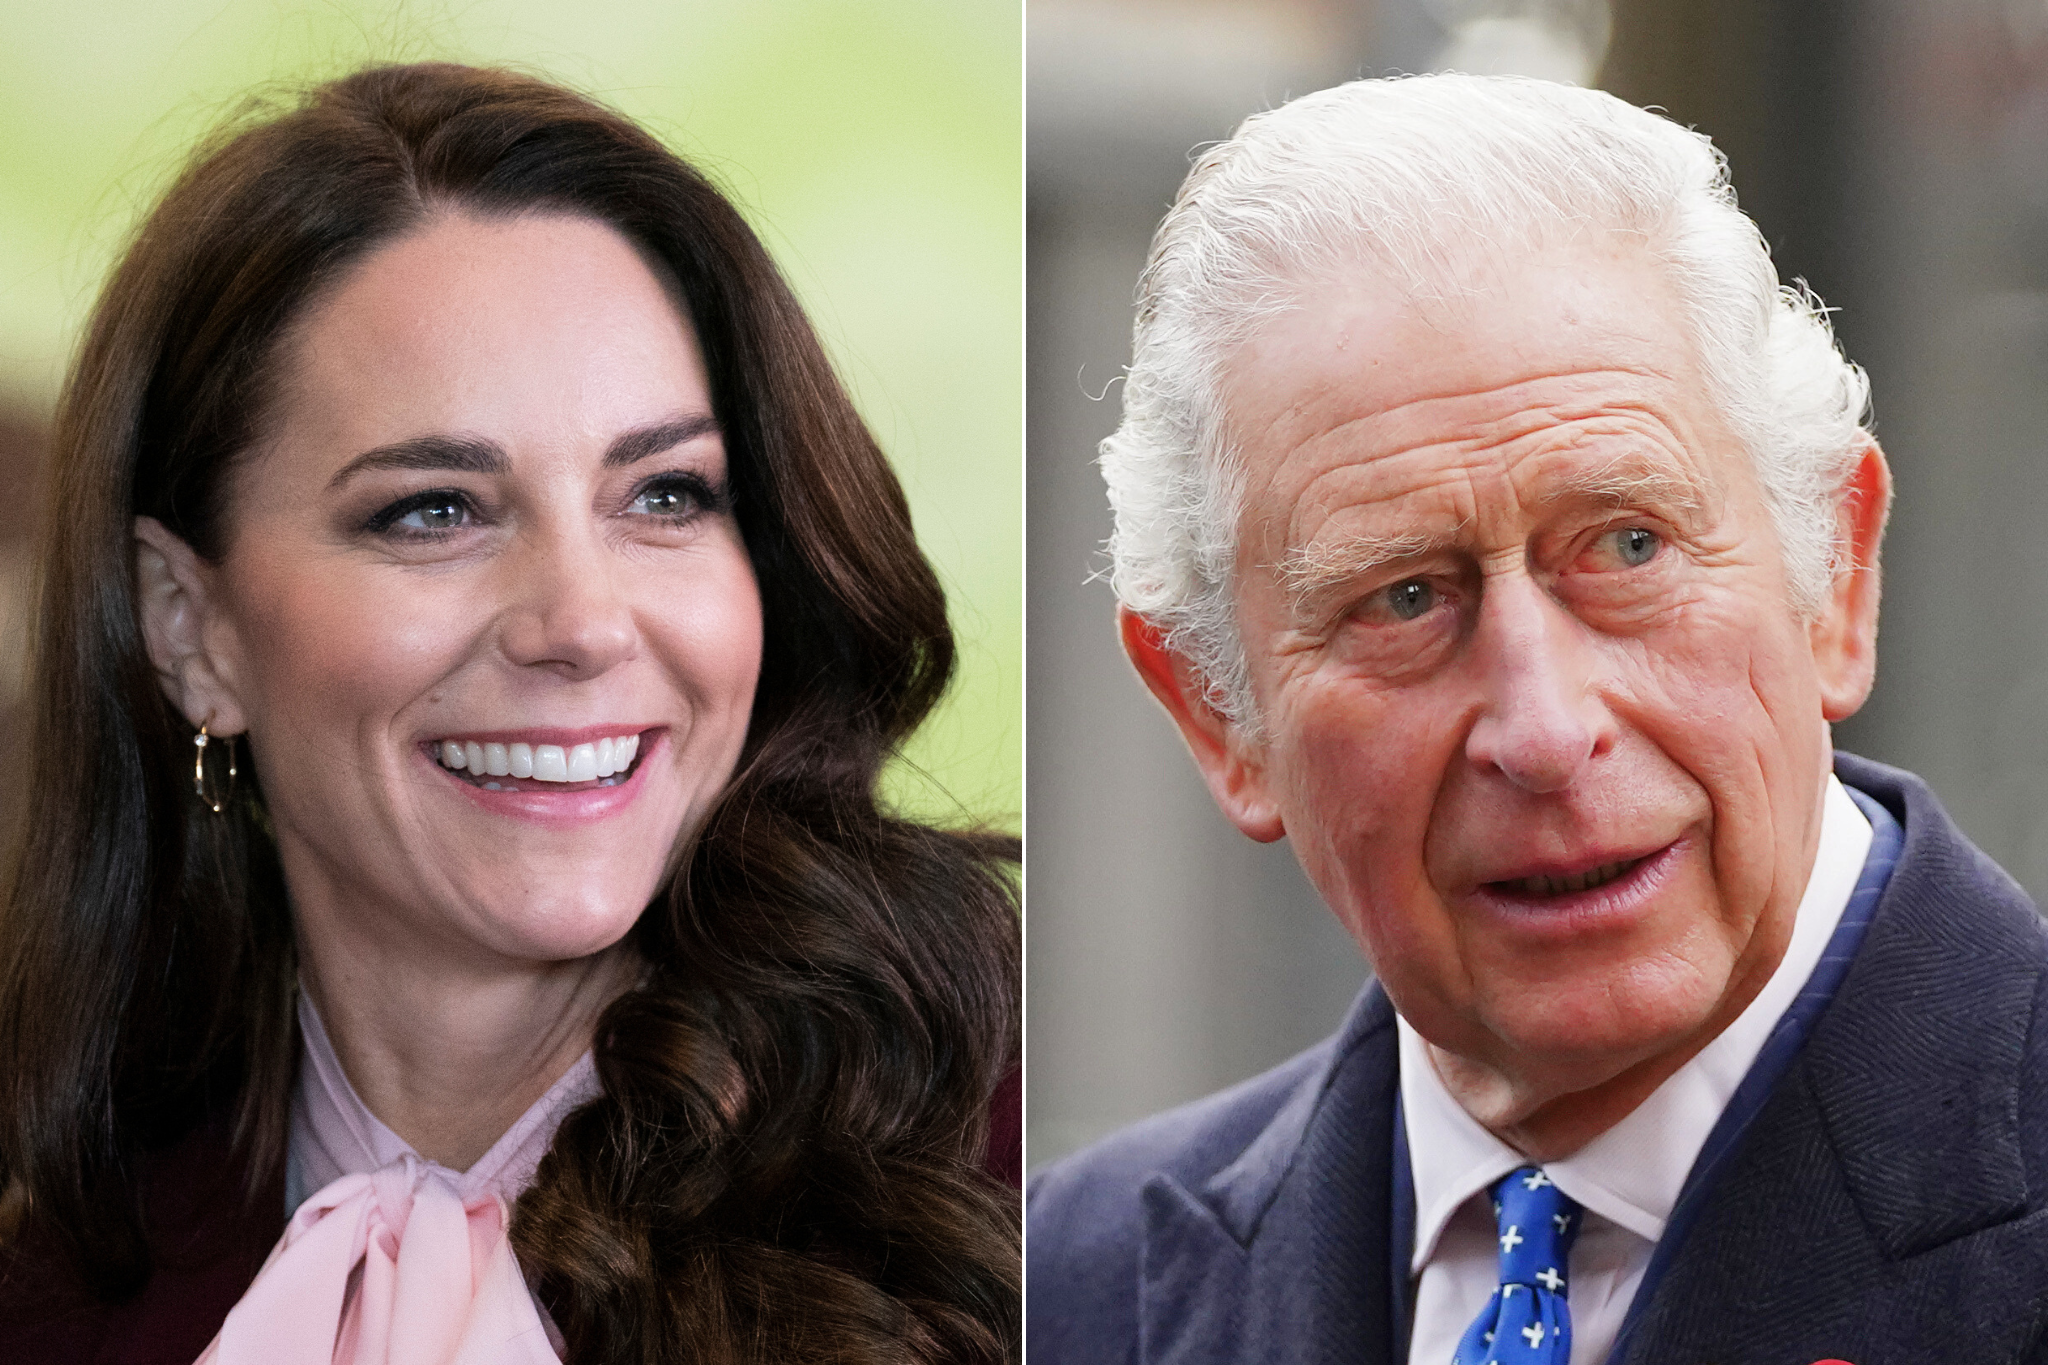 King Charles and Kate Middleton will appear together at the Trooping the Colour parade